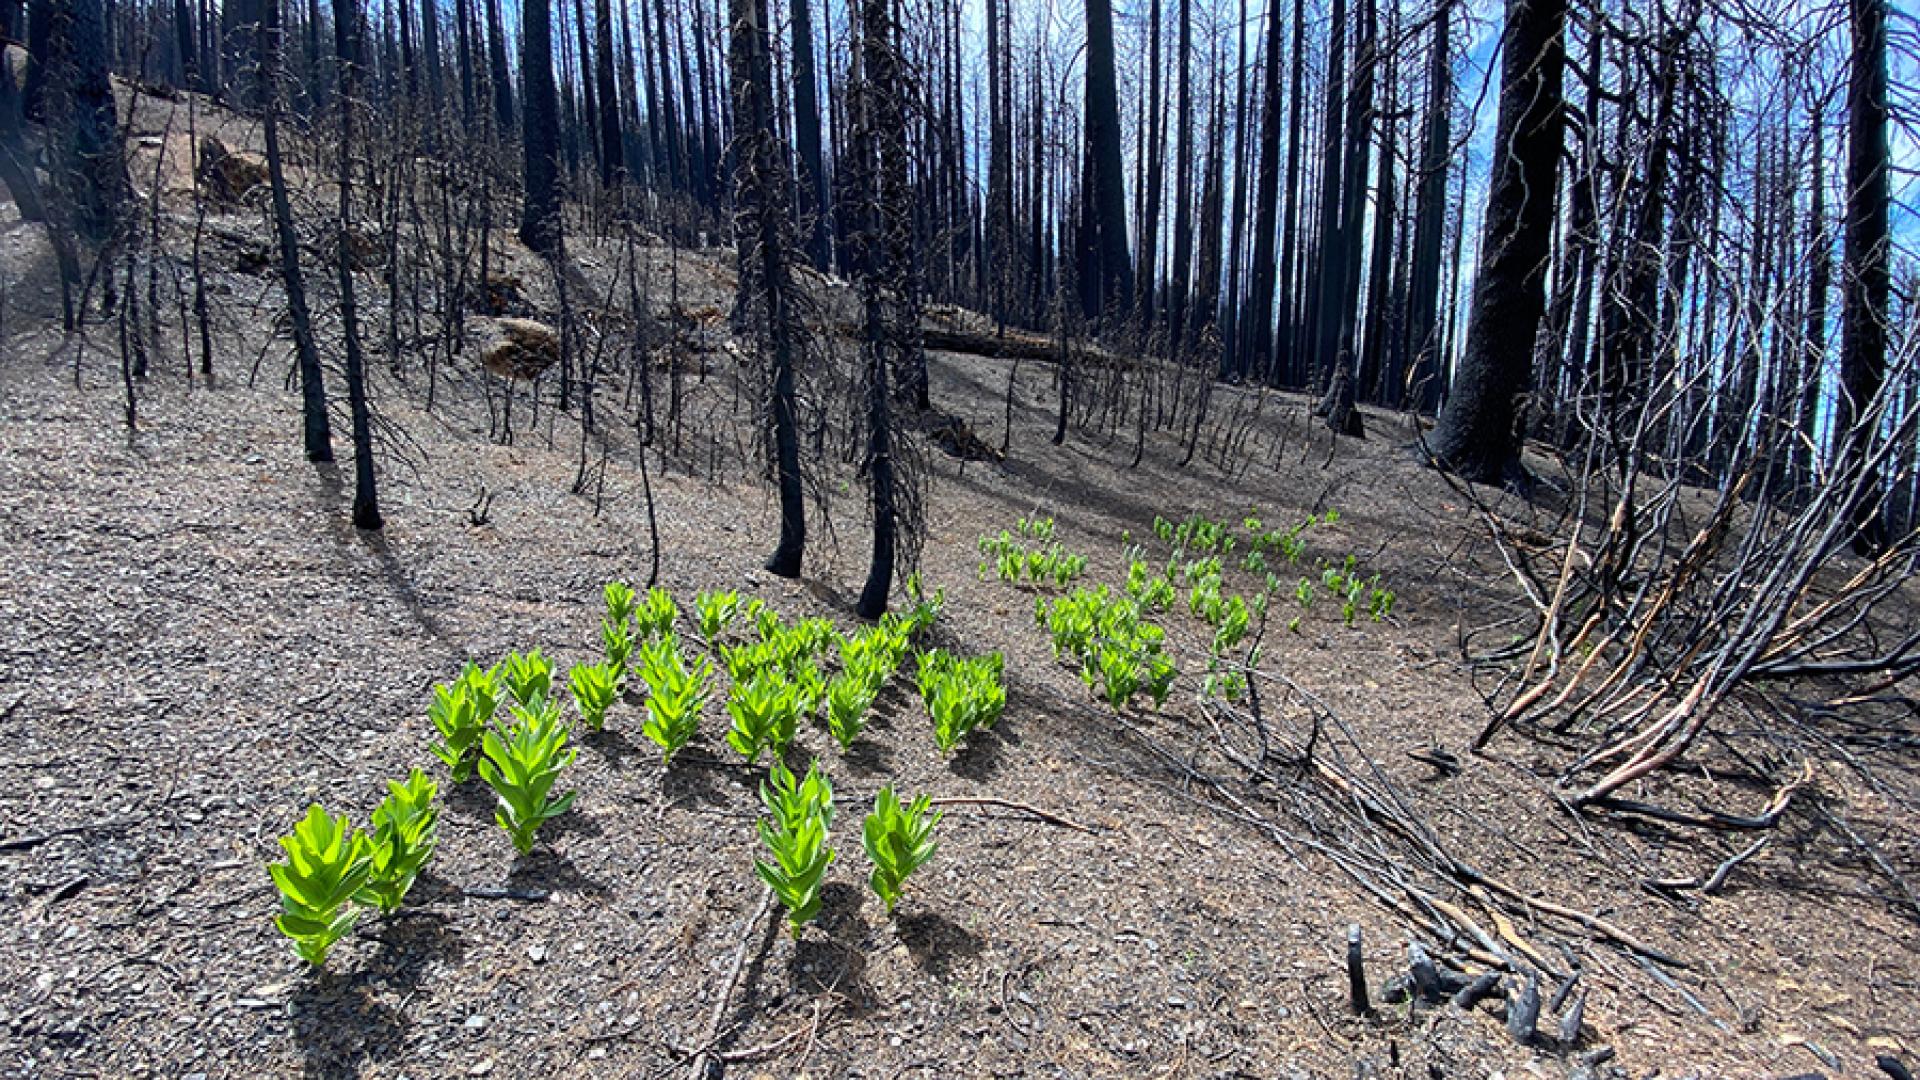 A patch of bright green corn lilies glow in the sunlight amid an otherwise barren forest floor and blackened trees stretching toward a blue sky. The lilies indicate the presence of shallow groundwater in a post-fire monitoring plot in the Mendocino Nation